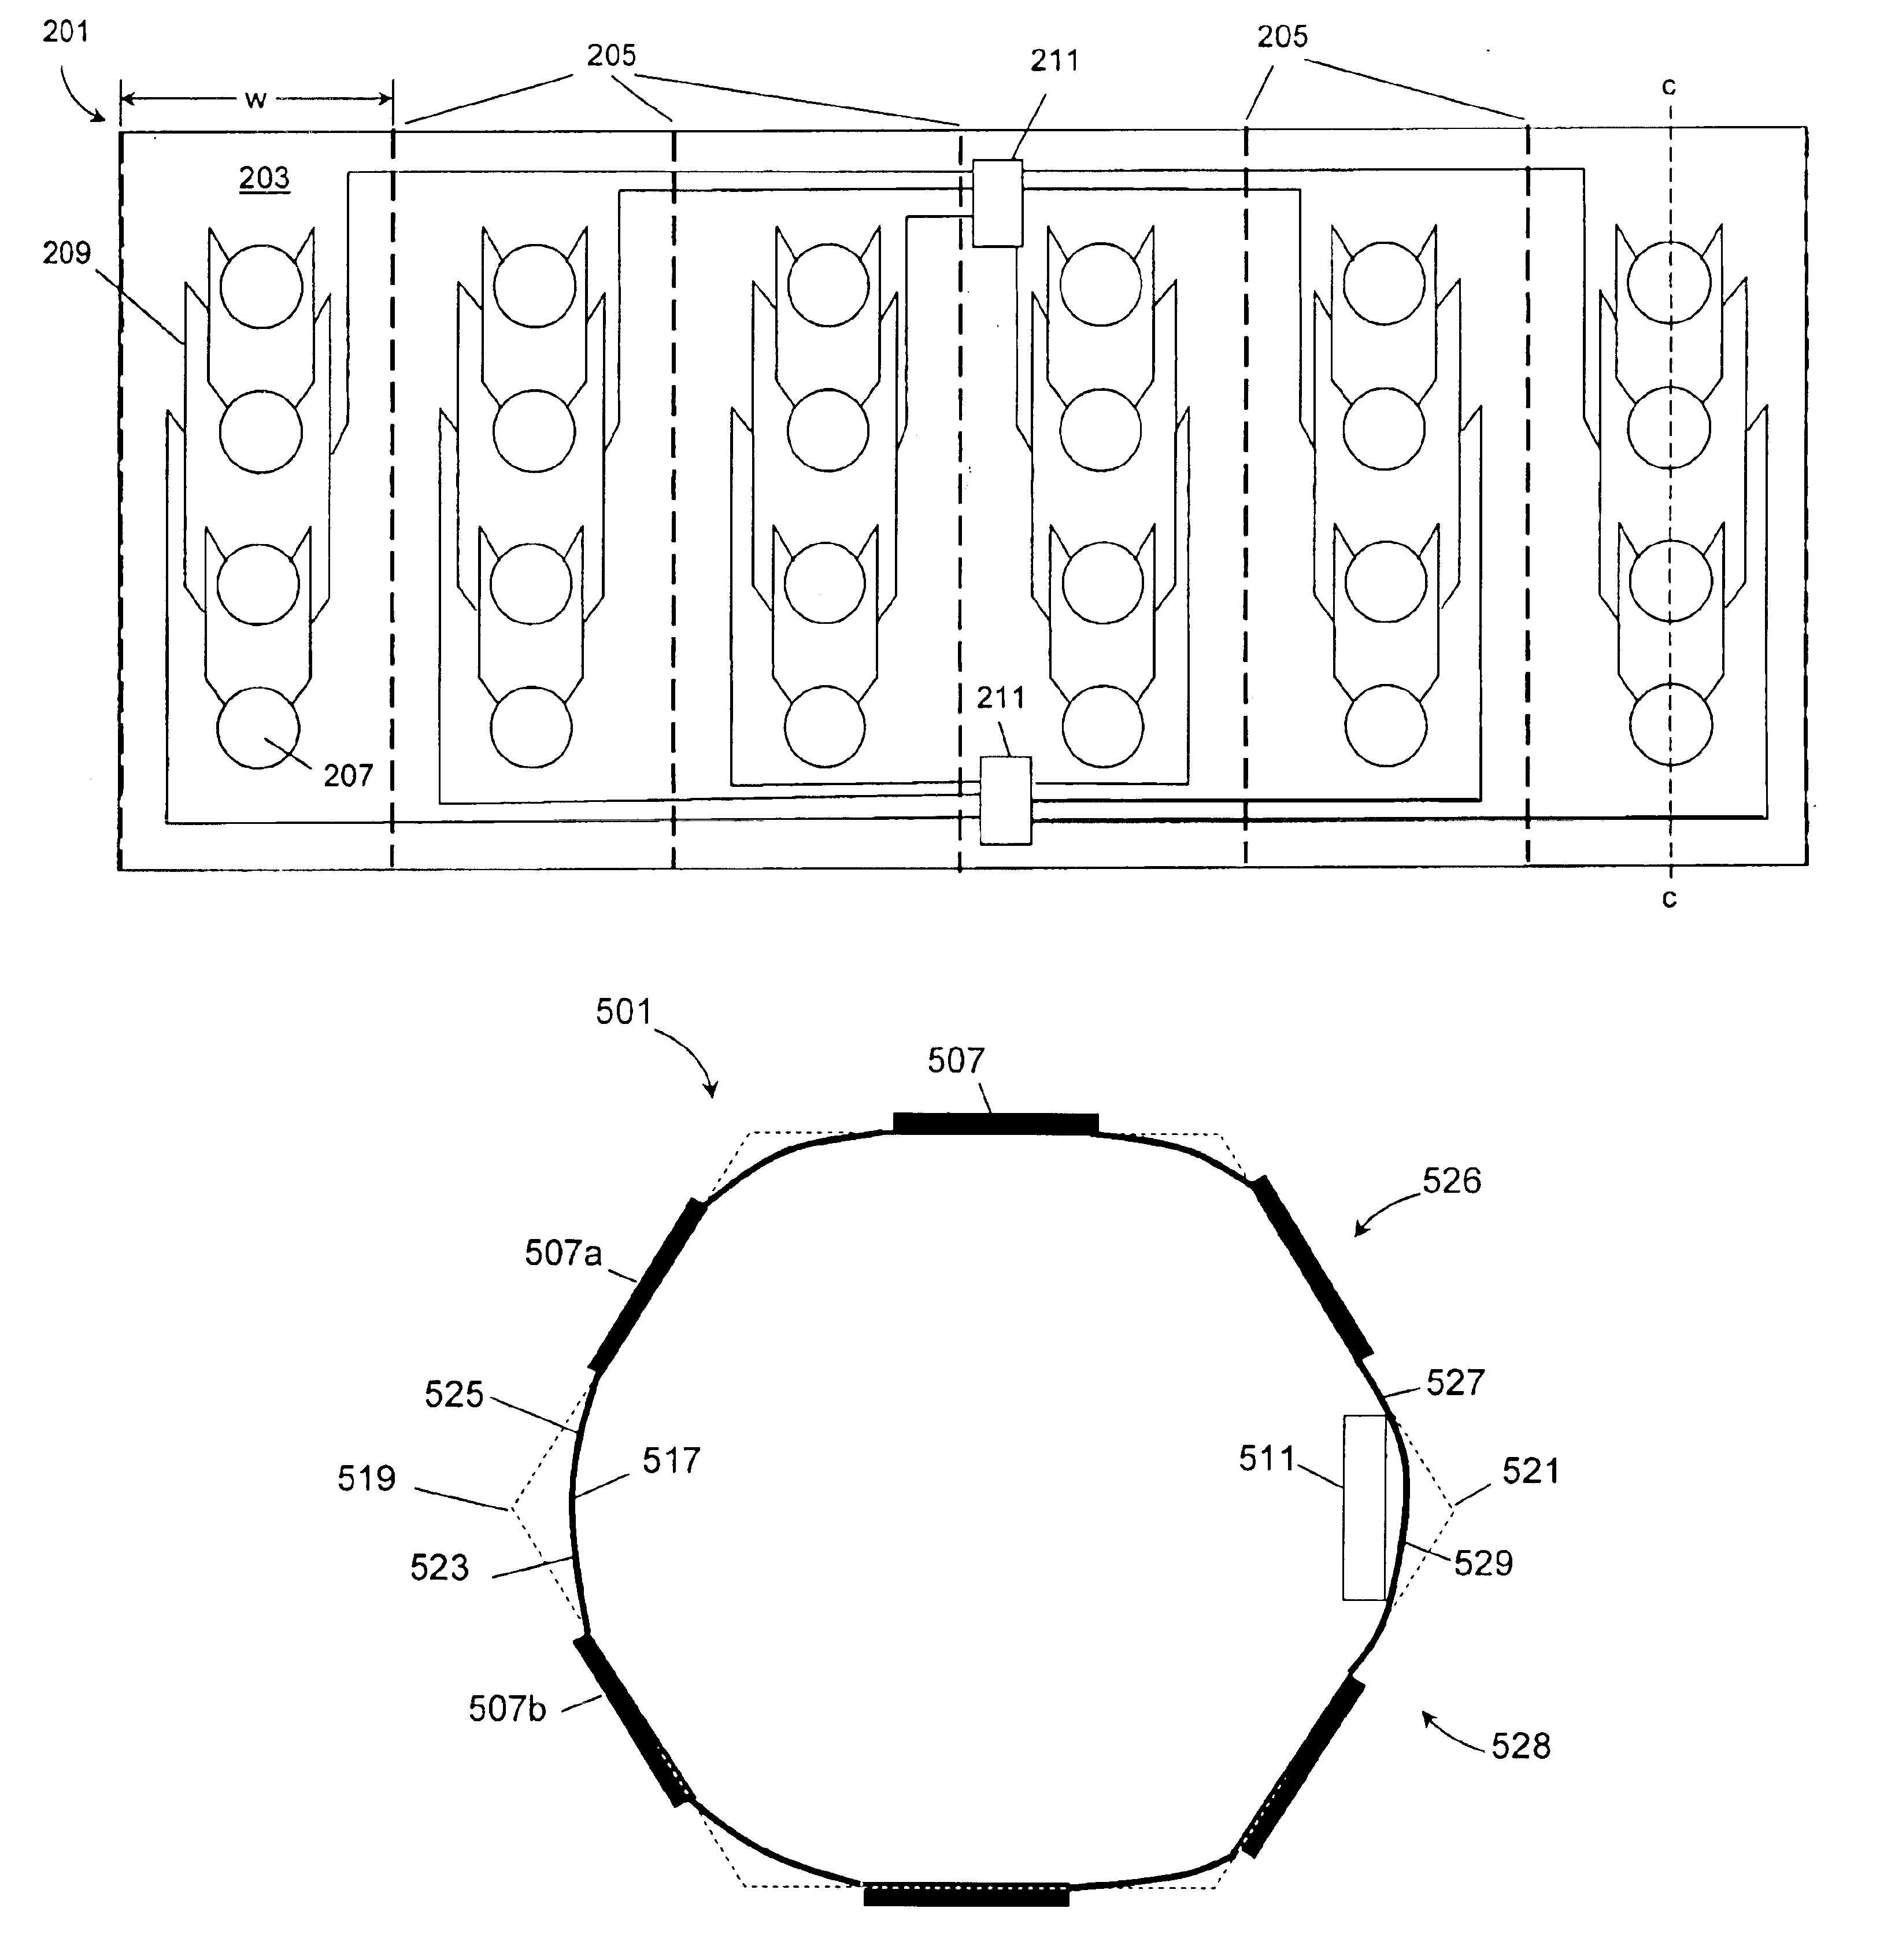 Offsetting patch antennas on an ominidirectional multi-facetted array to allow space for an interconnection board